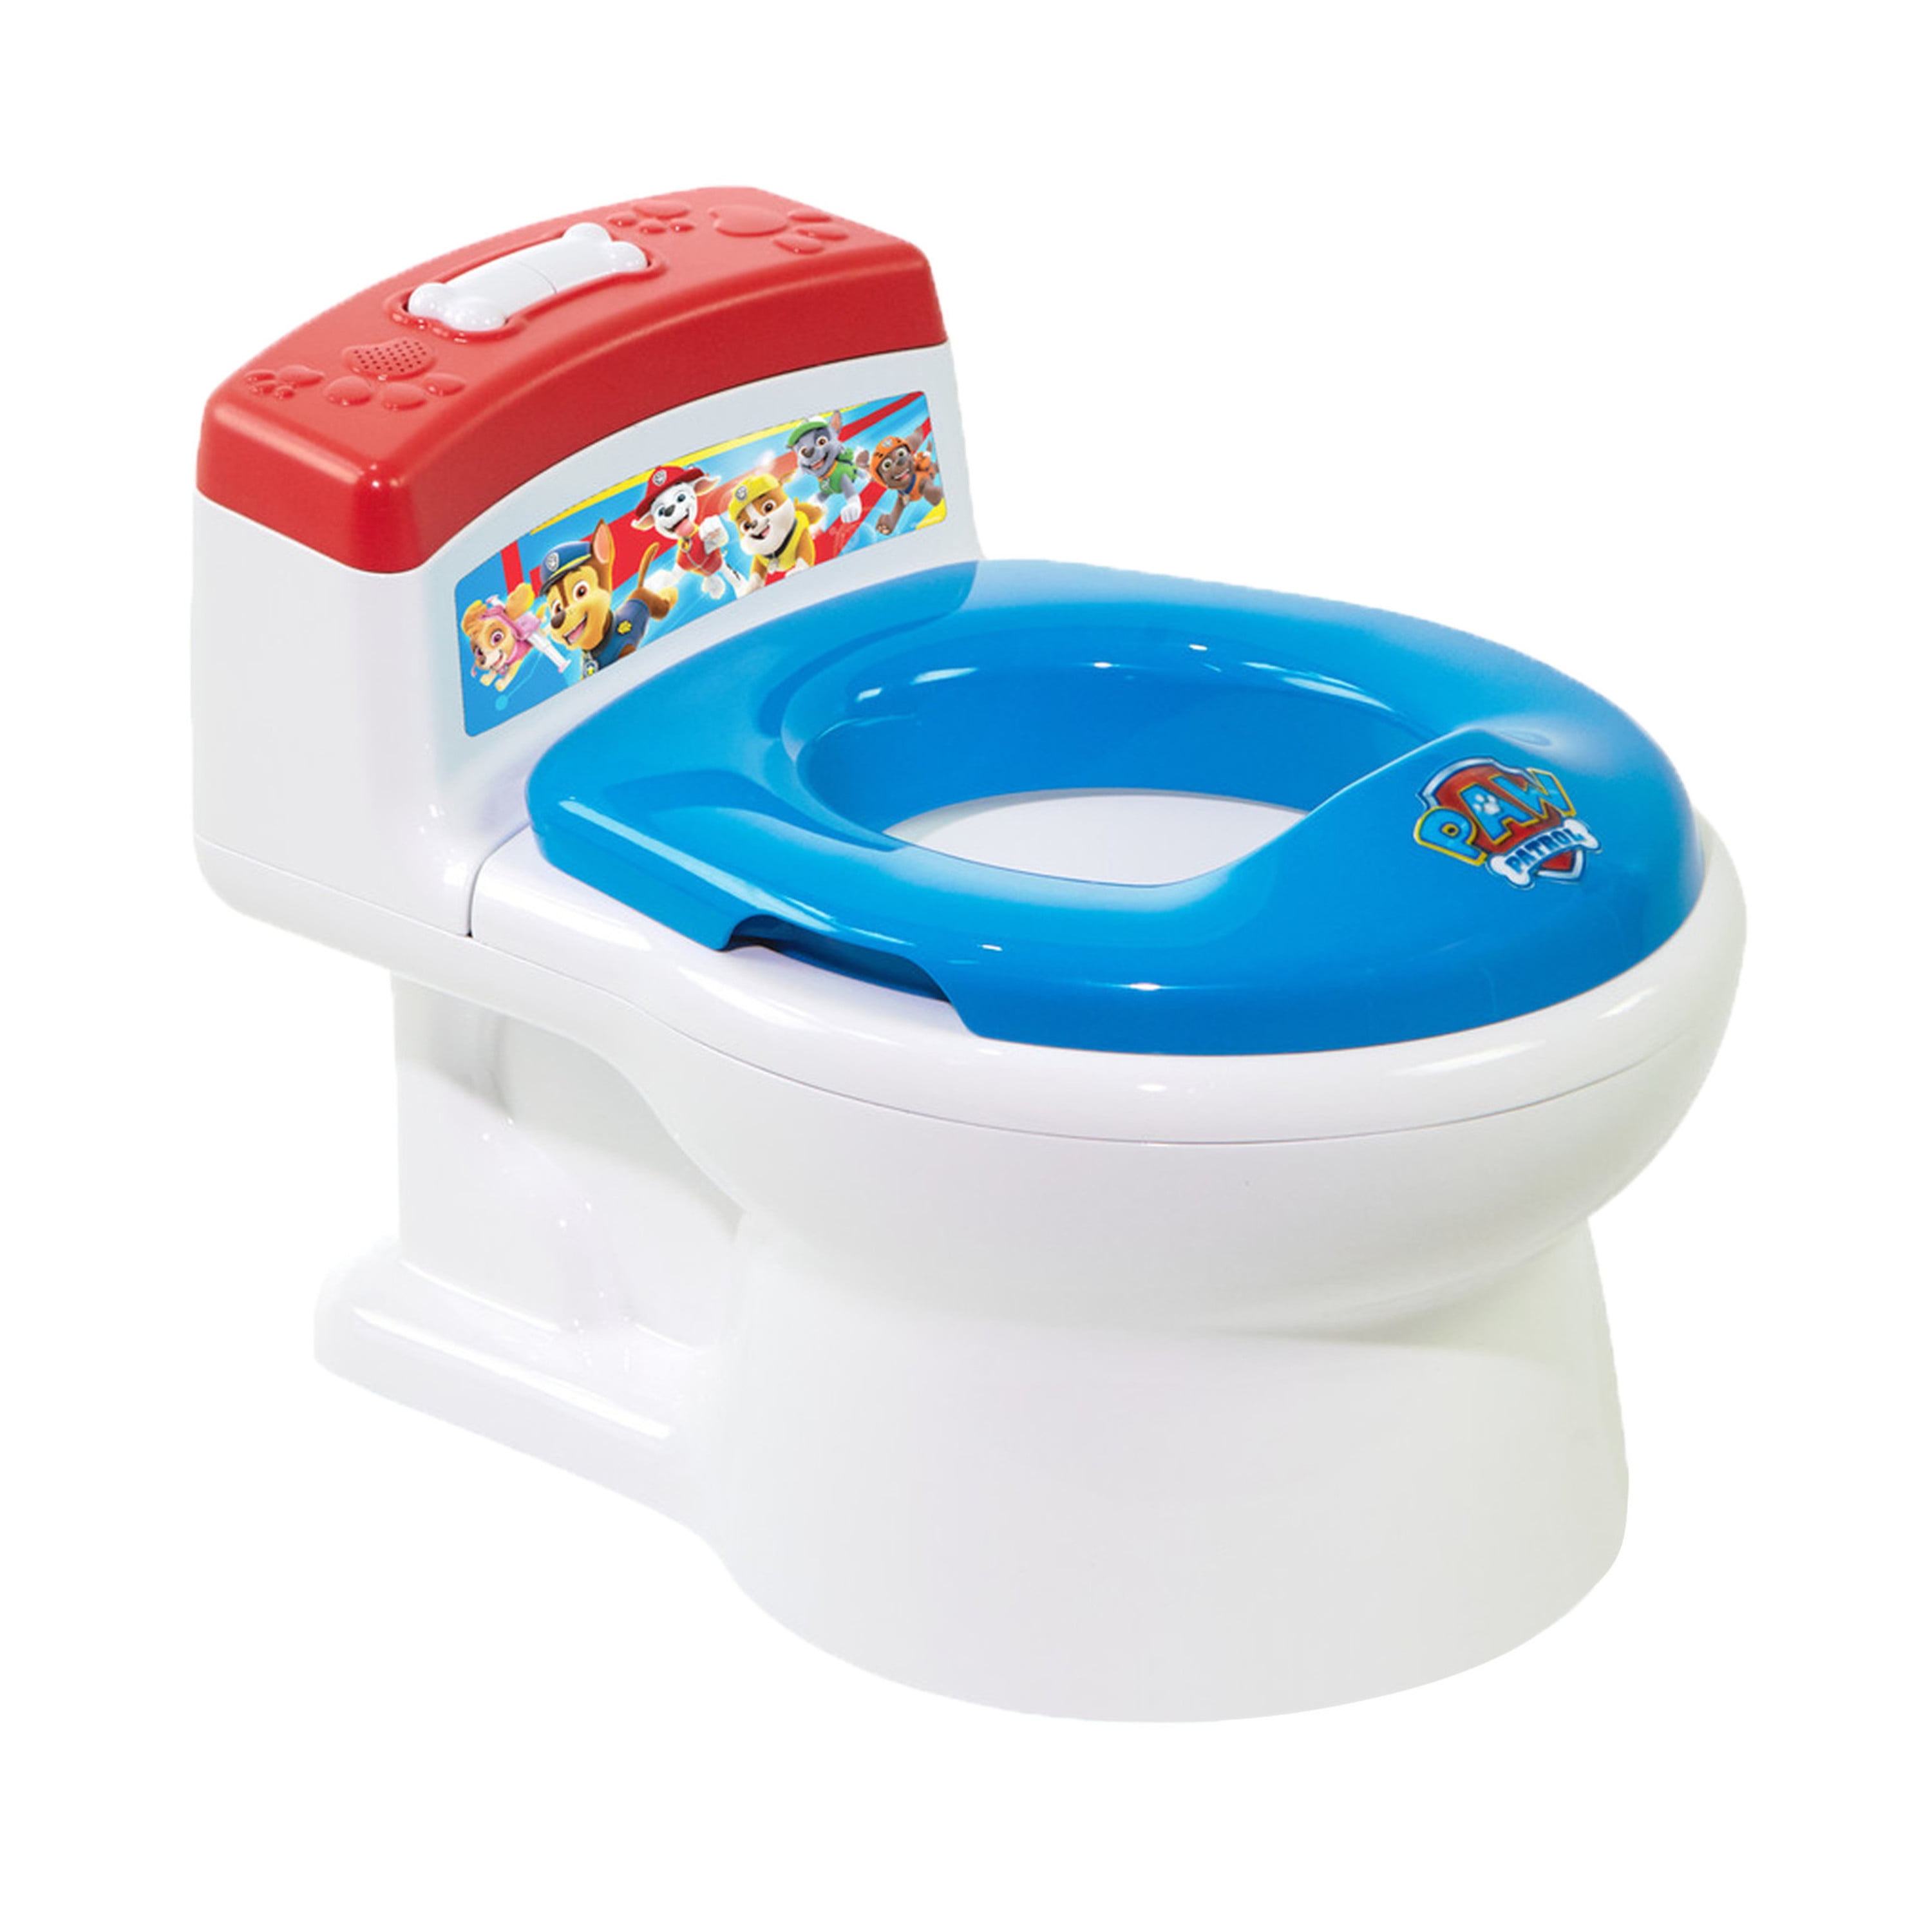 Potty Training Toilet Toddler, Princess Potty Chair Target